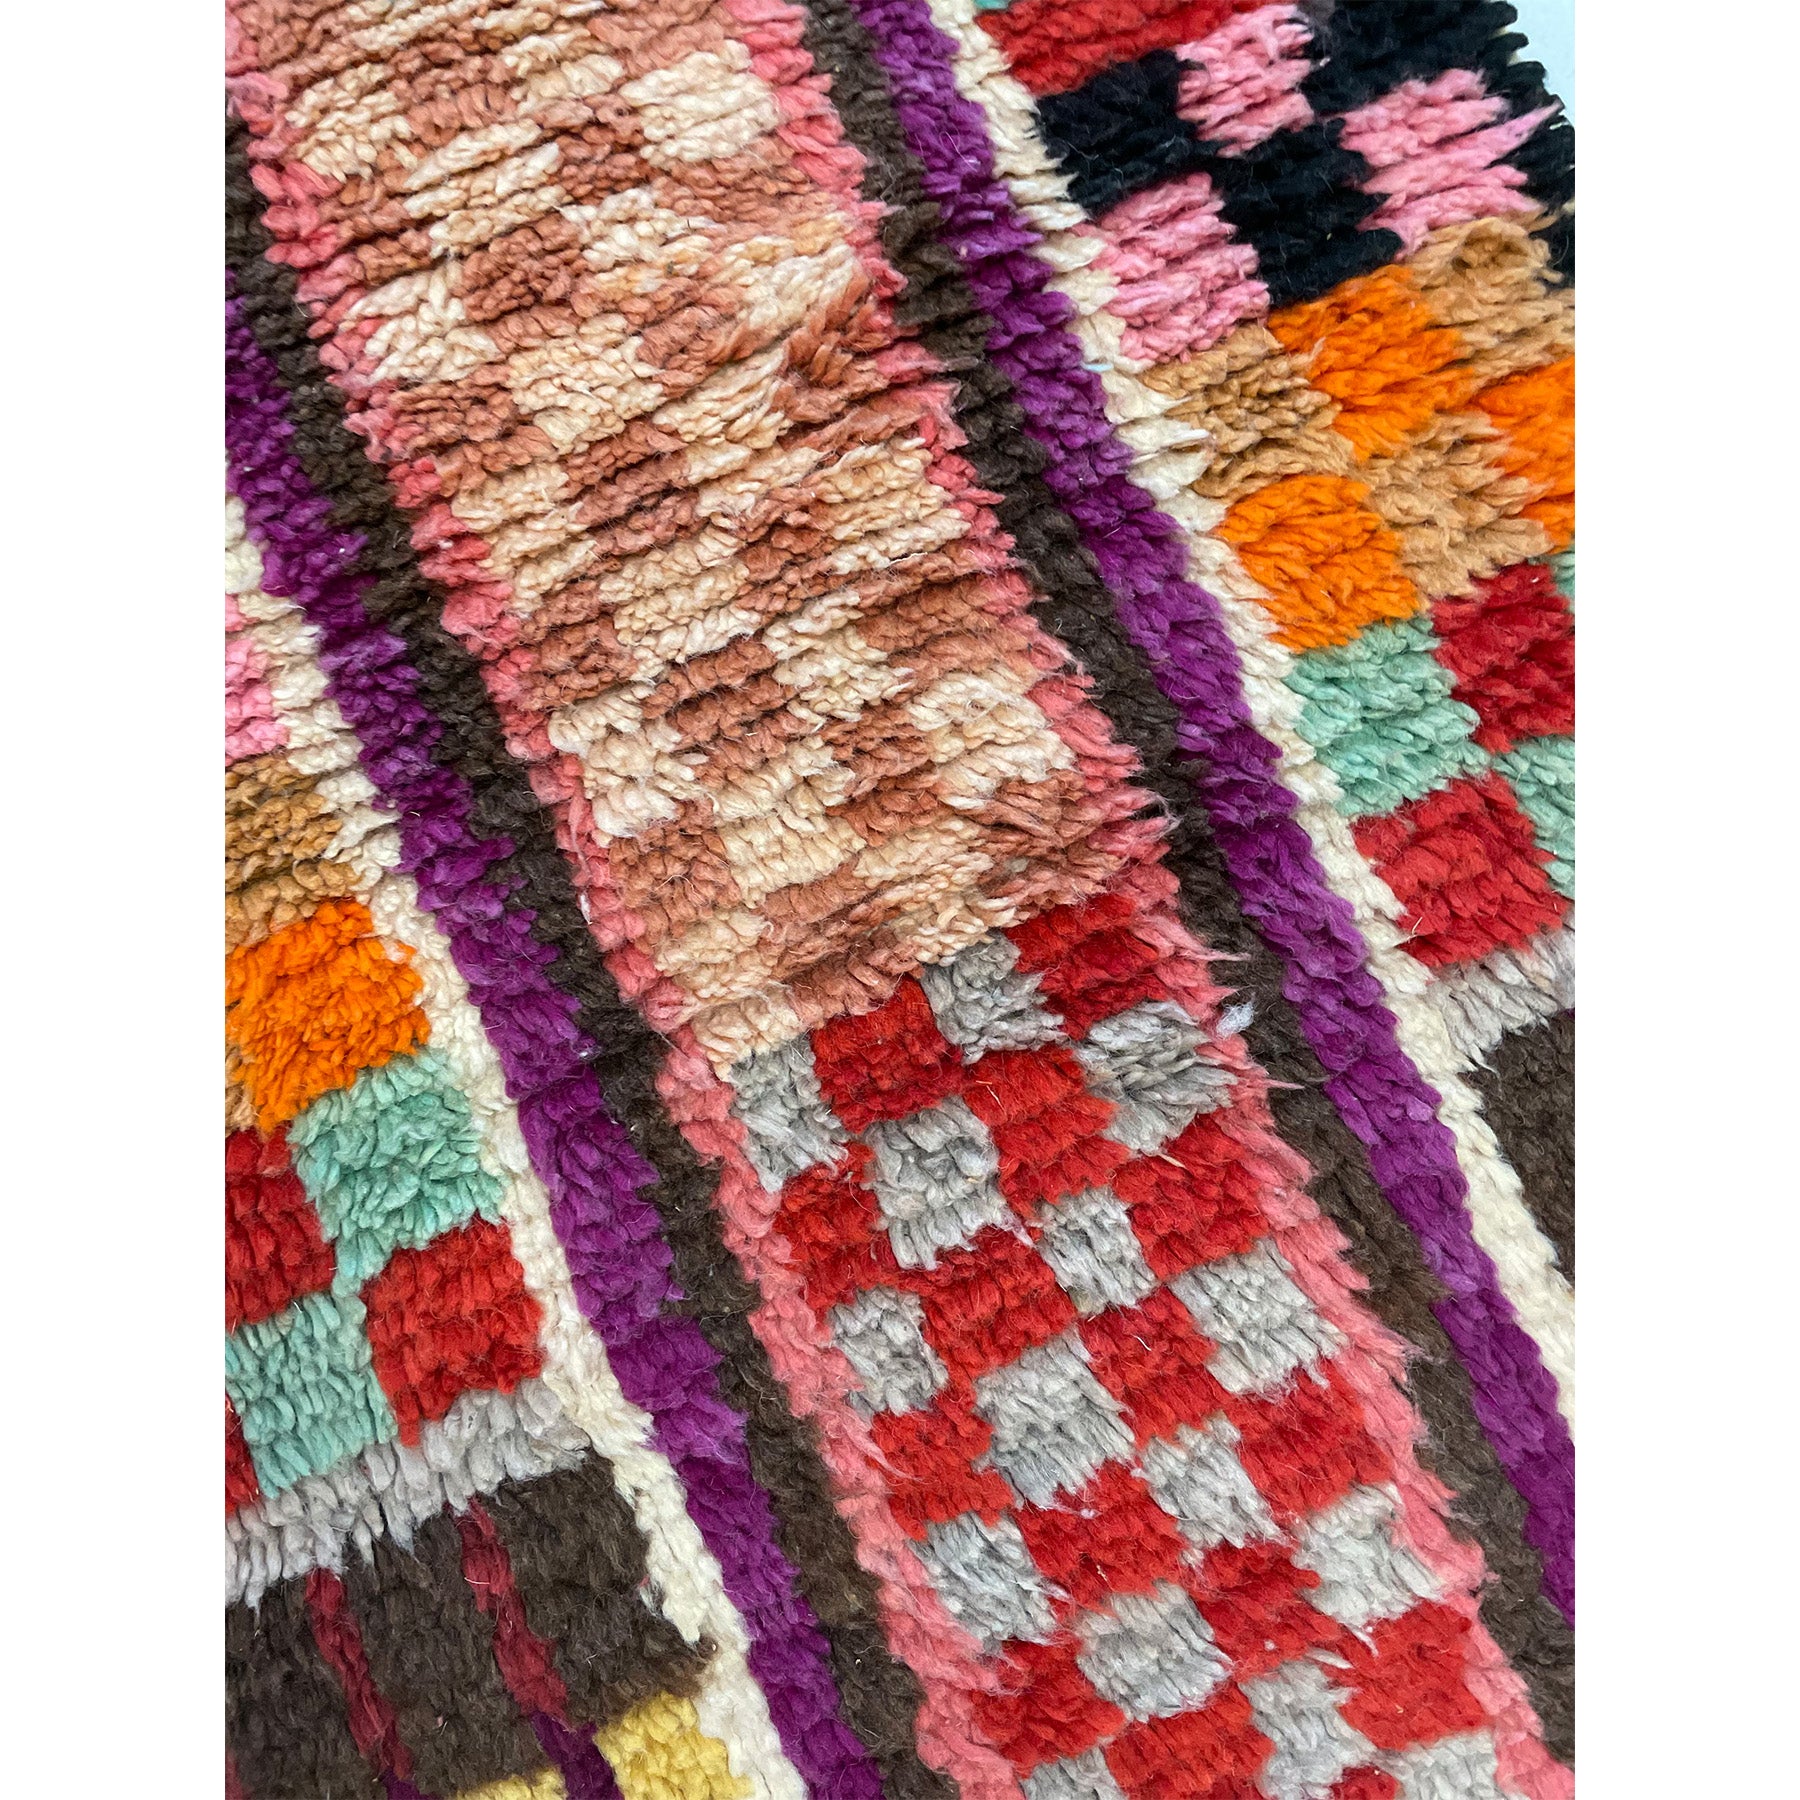 Handwoven Moroccan runner rug with colorful pattern - Kantara | Moroccan Rugs